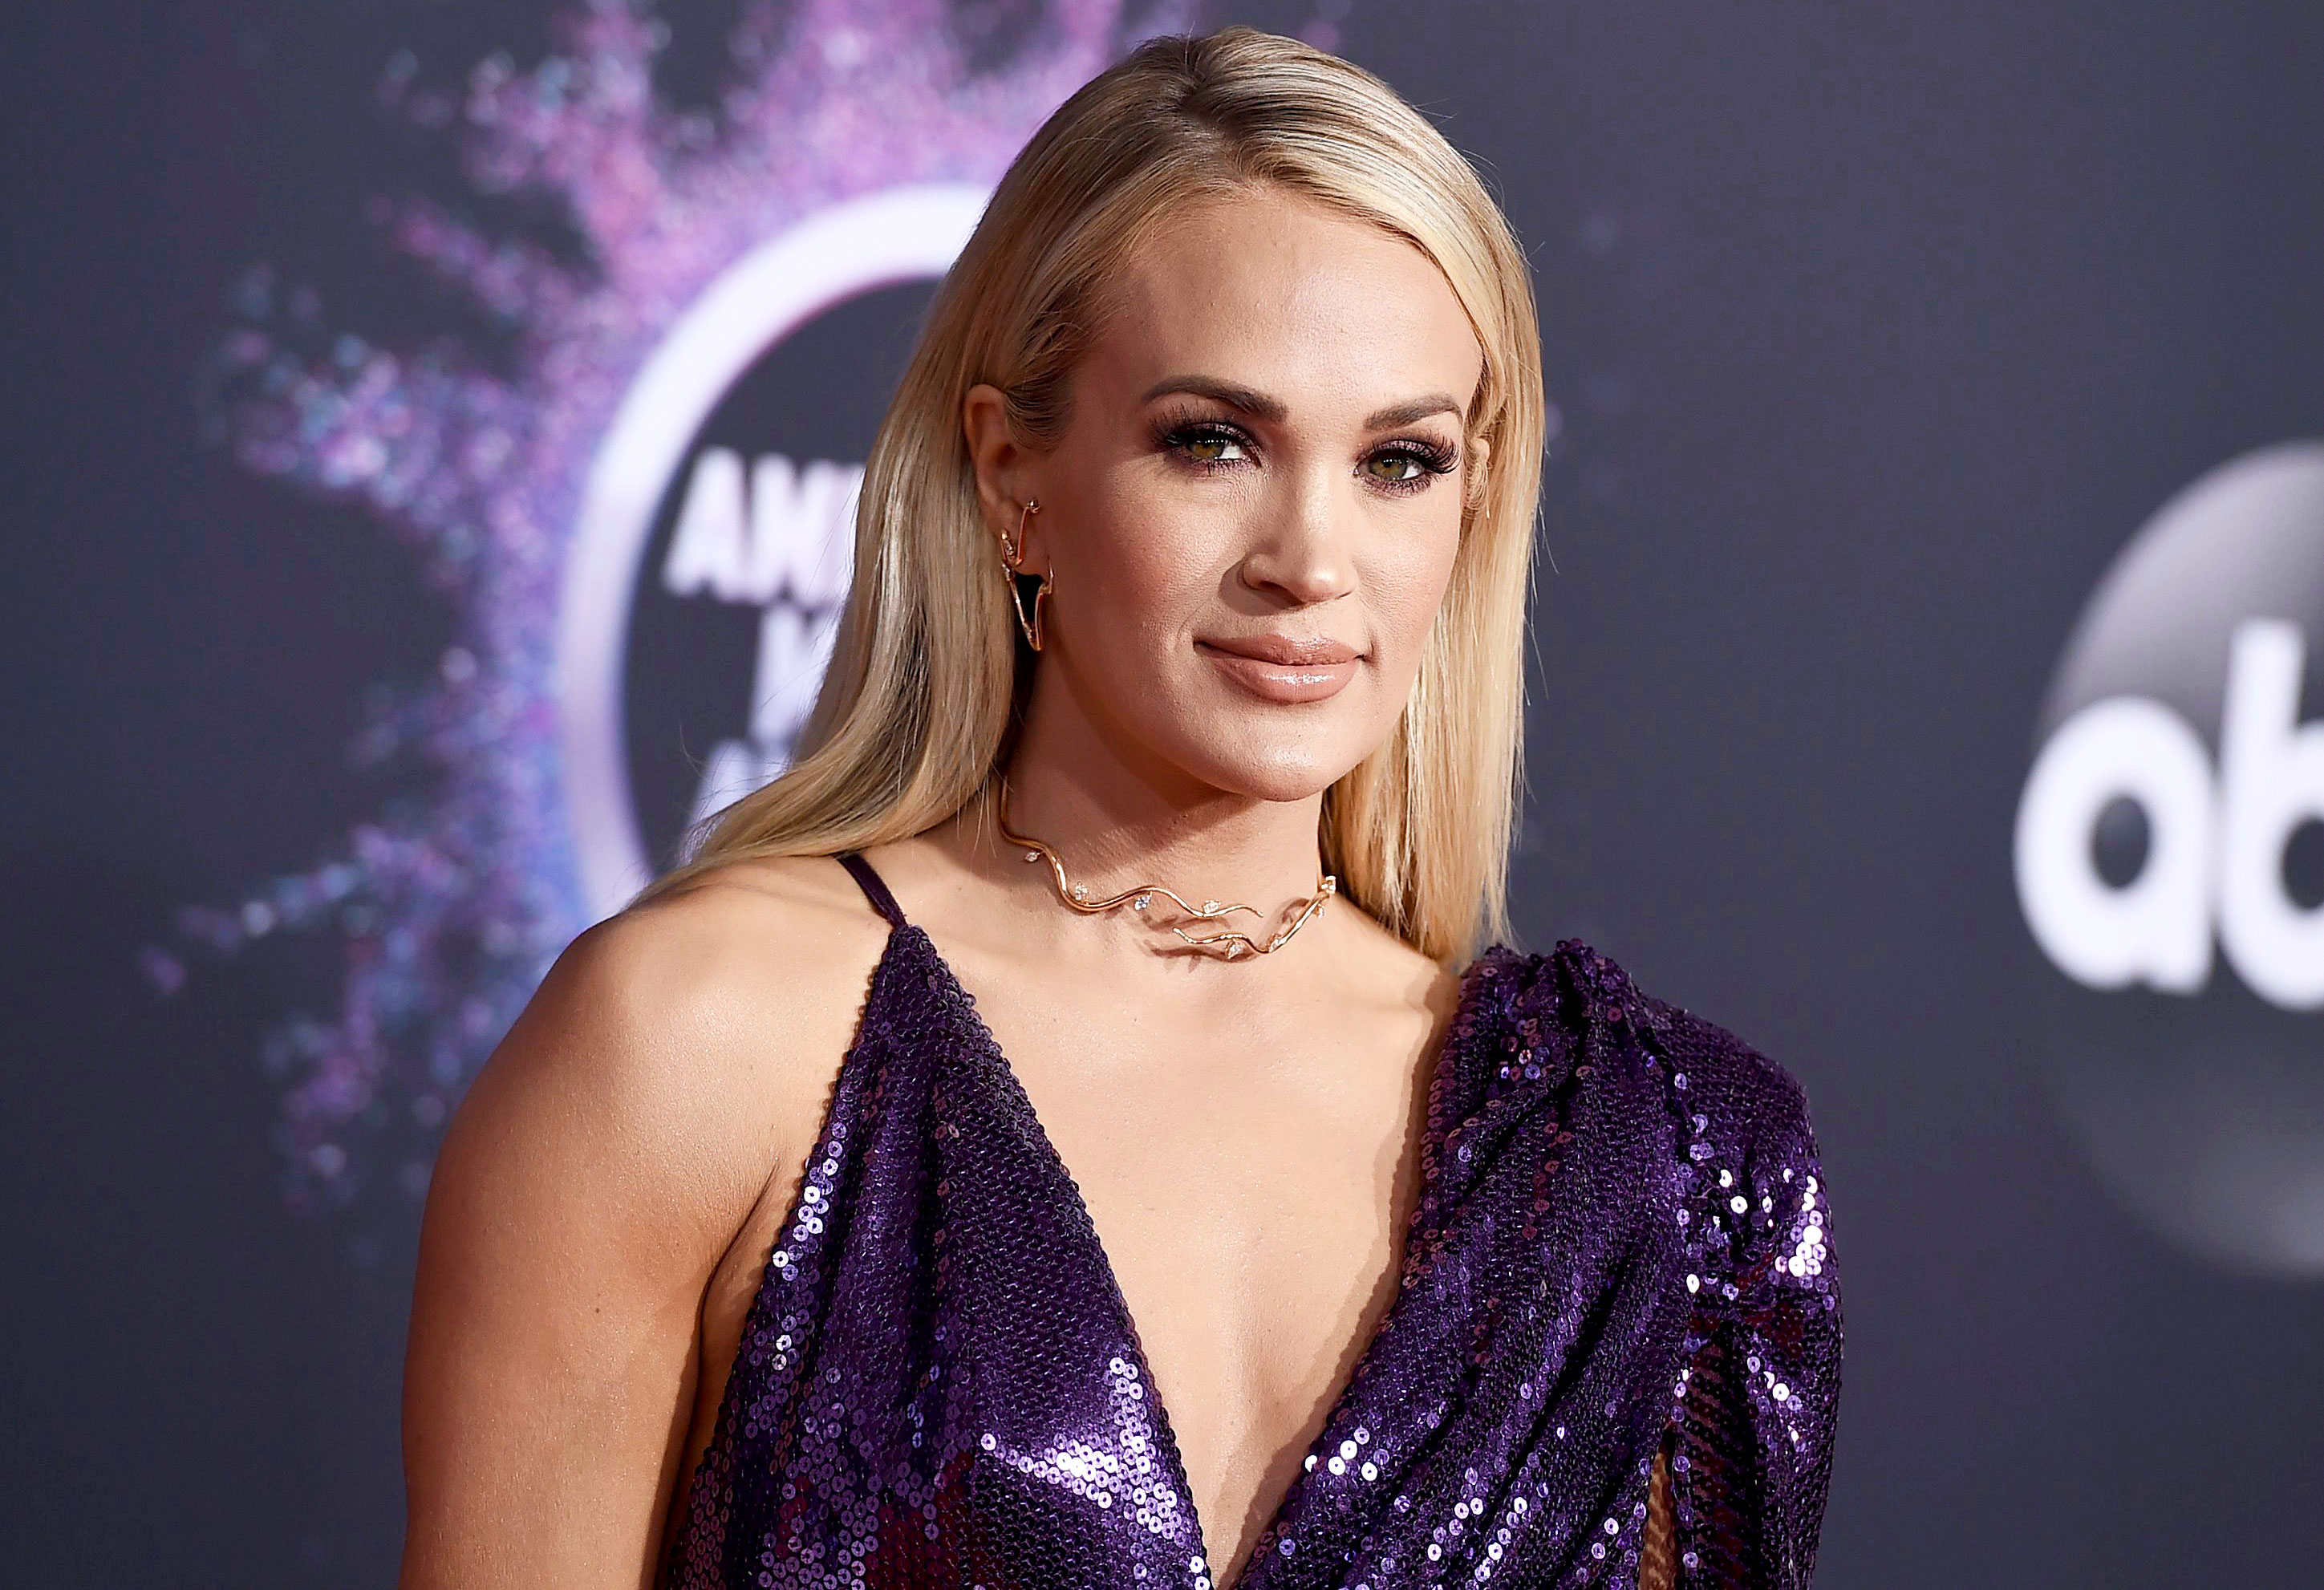 Honest Quotes About Motherhood From Carrie Underwood